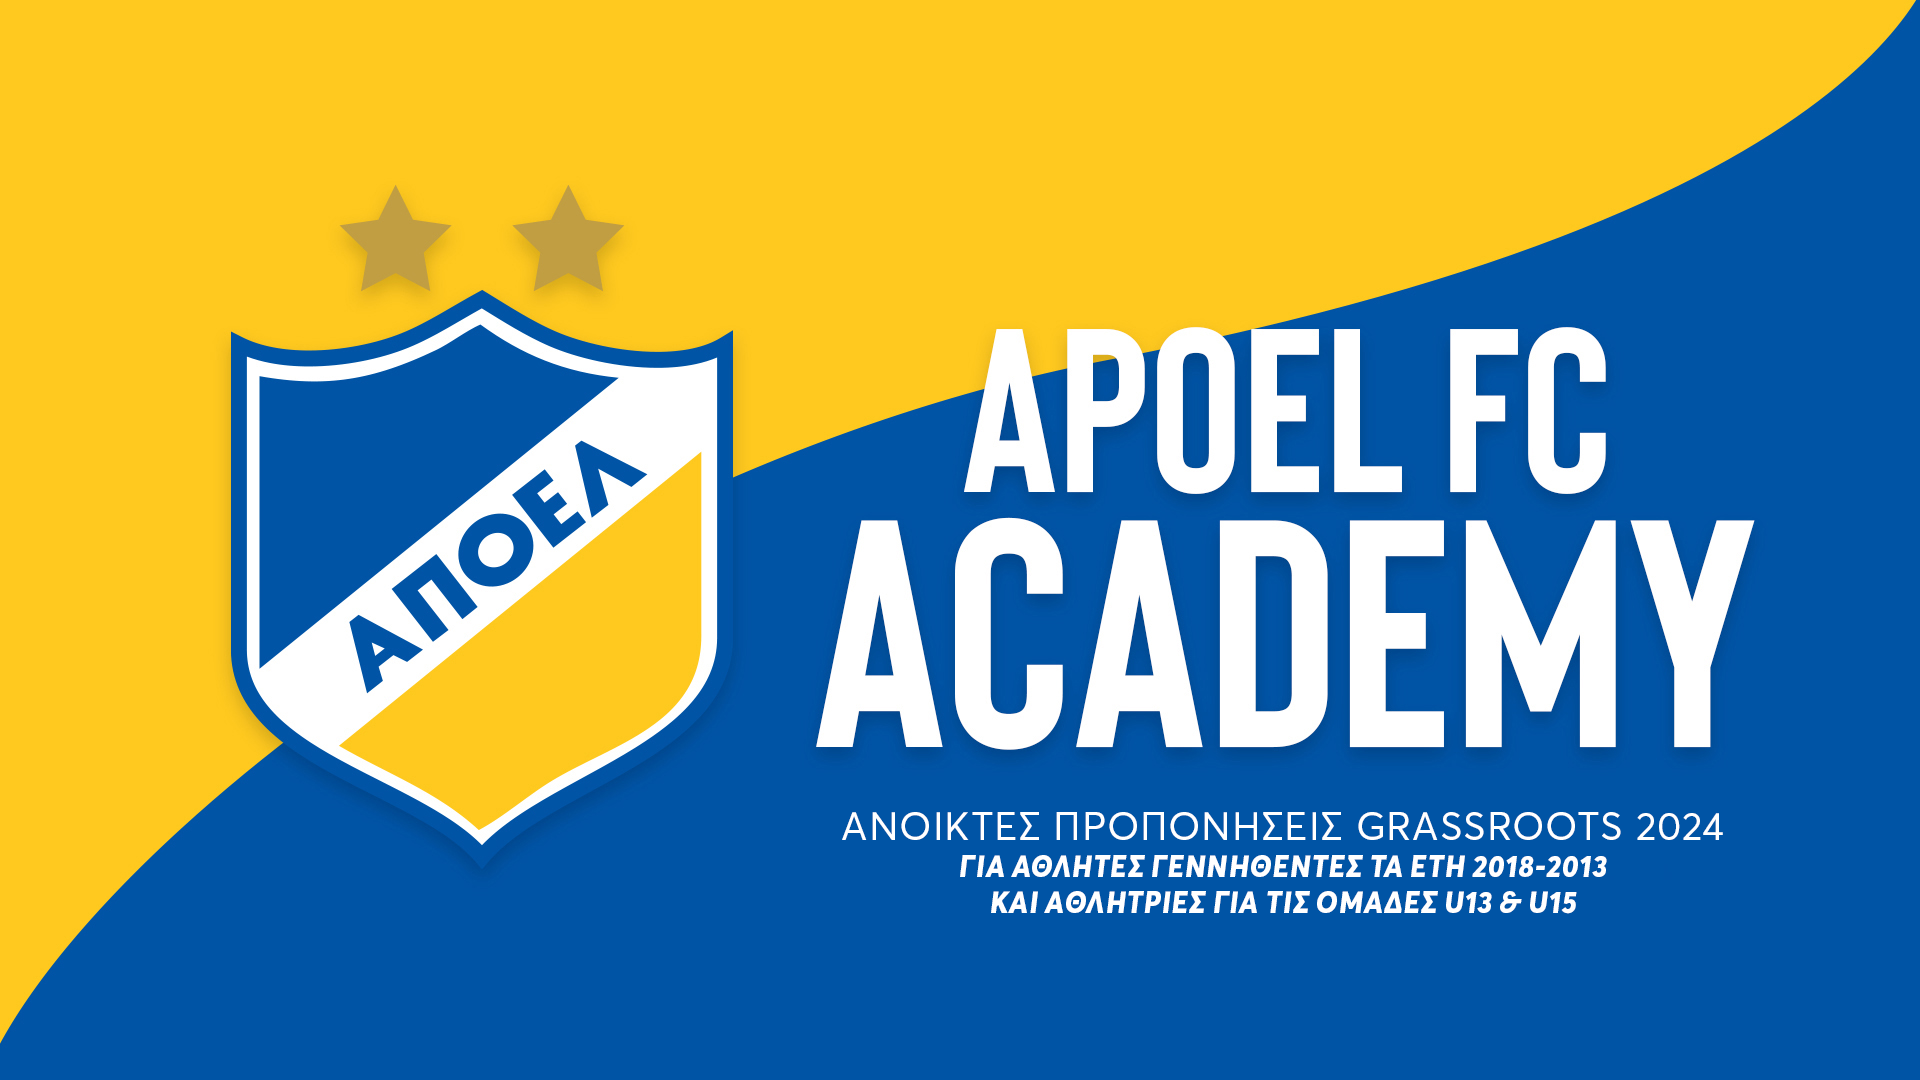 COVER_ACADEMY_AnoiktesProponiseisGrassroots2024